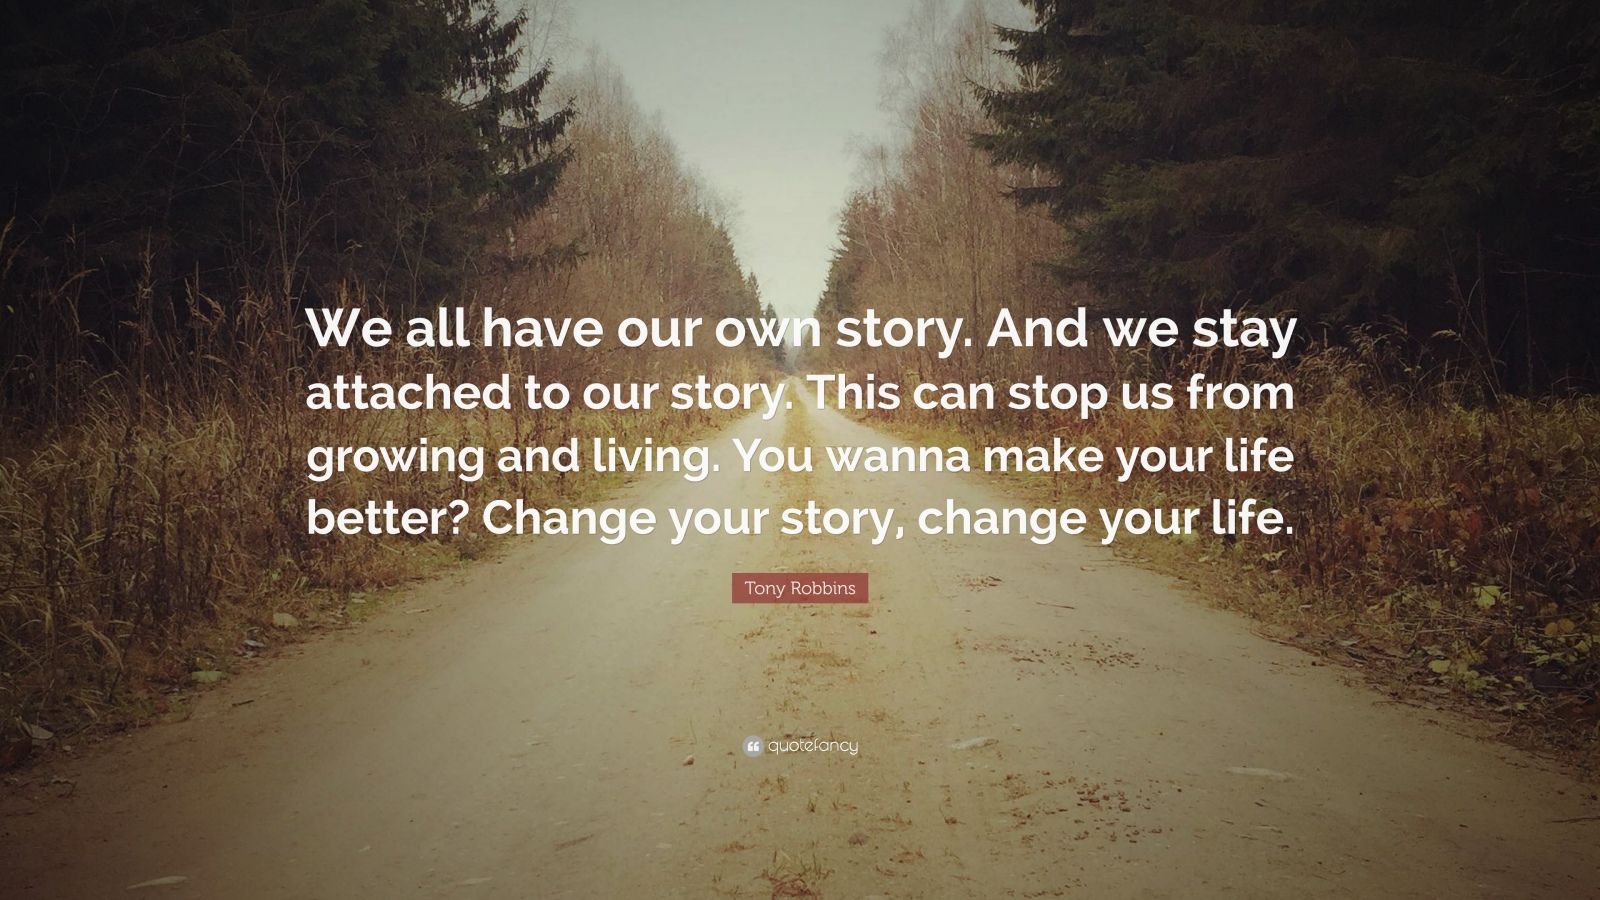 Focus On What Matters - Author of Your Own Story